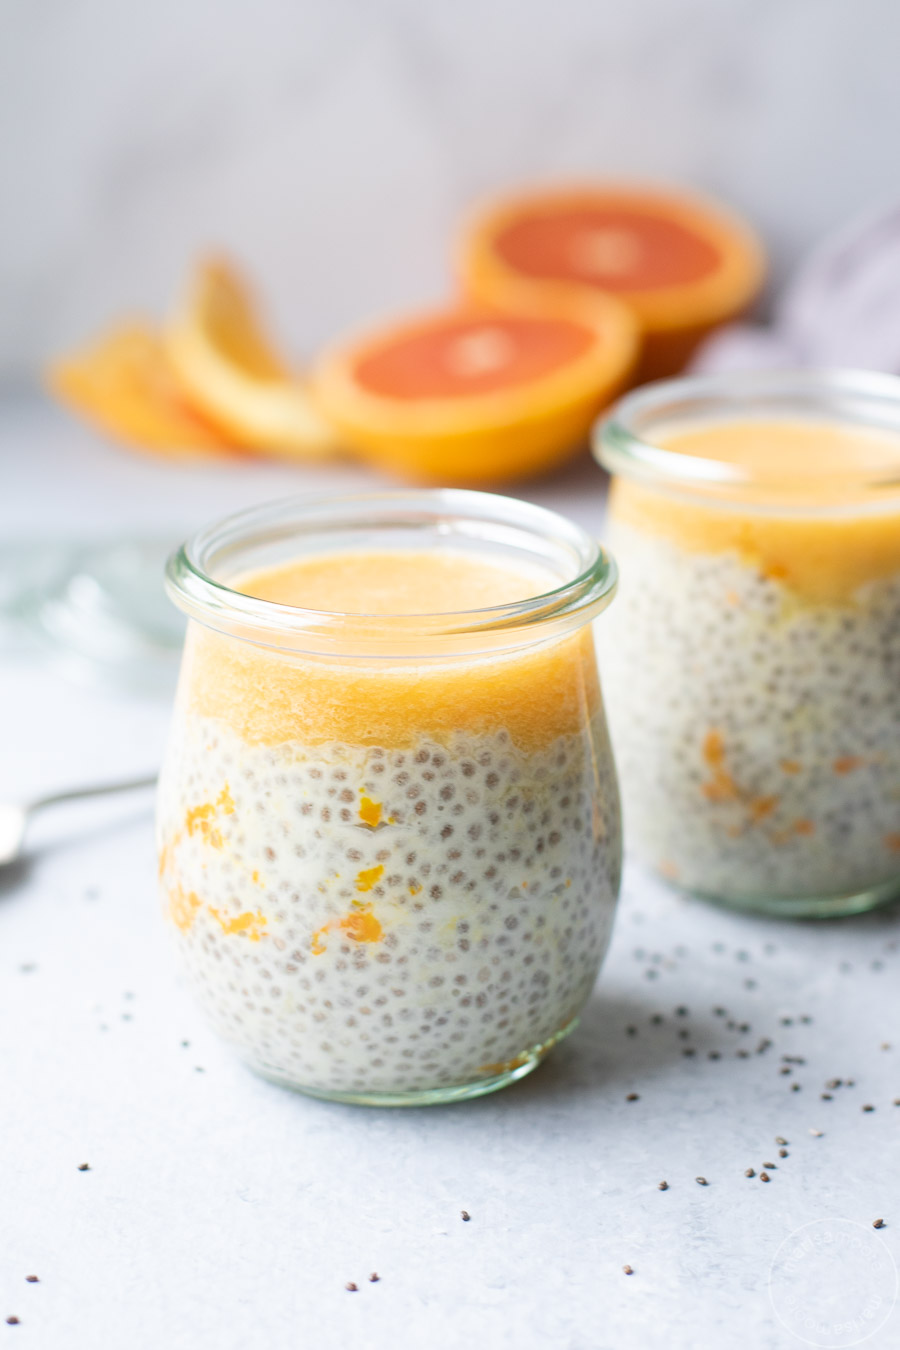 creamsicle chia pudding in jars with oranges in background